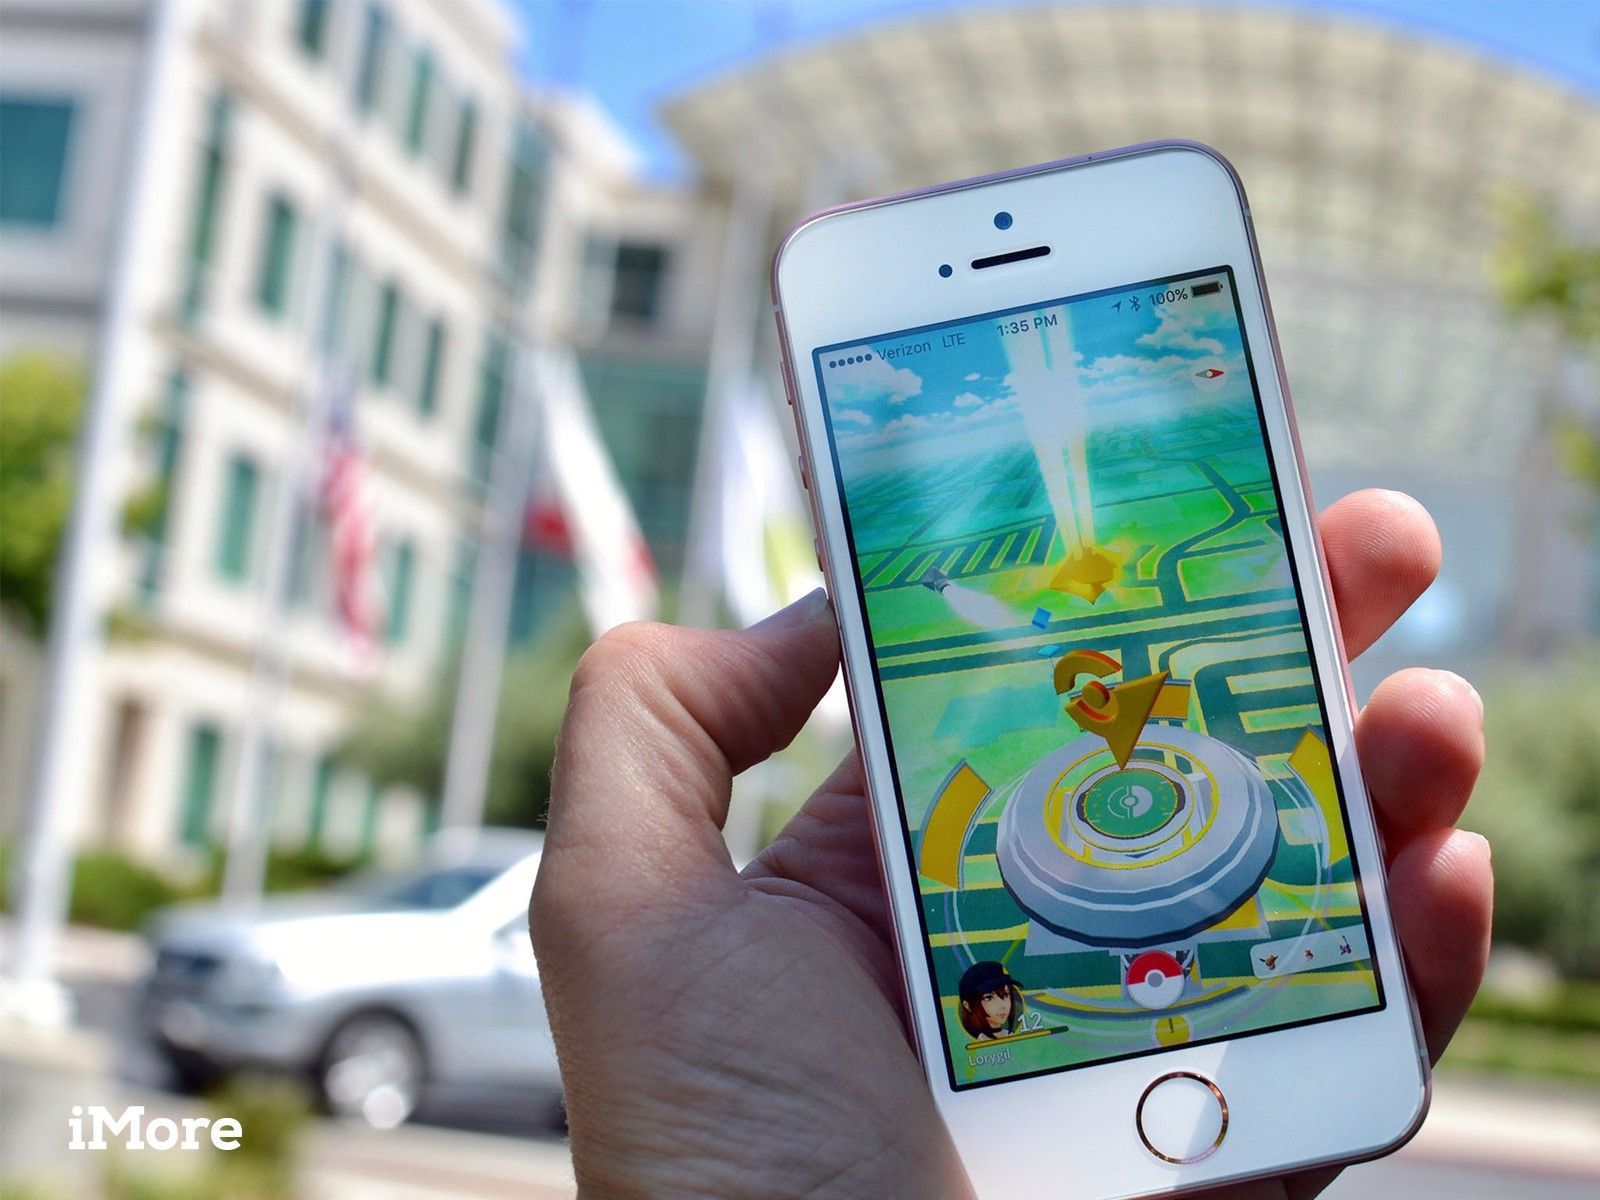 Samsung May Invest Into Pokémon GO Developer And Preload Niantic Games On New Phones